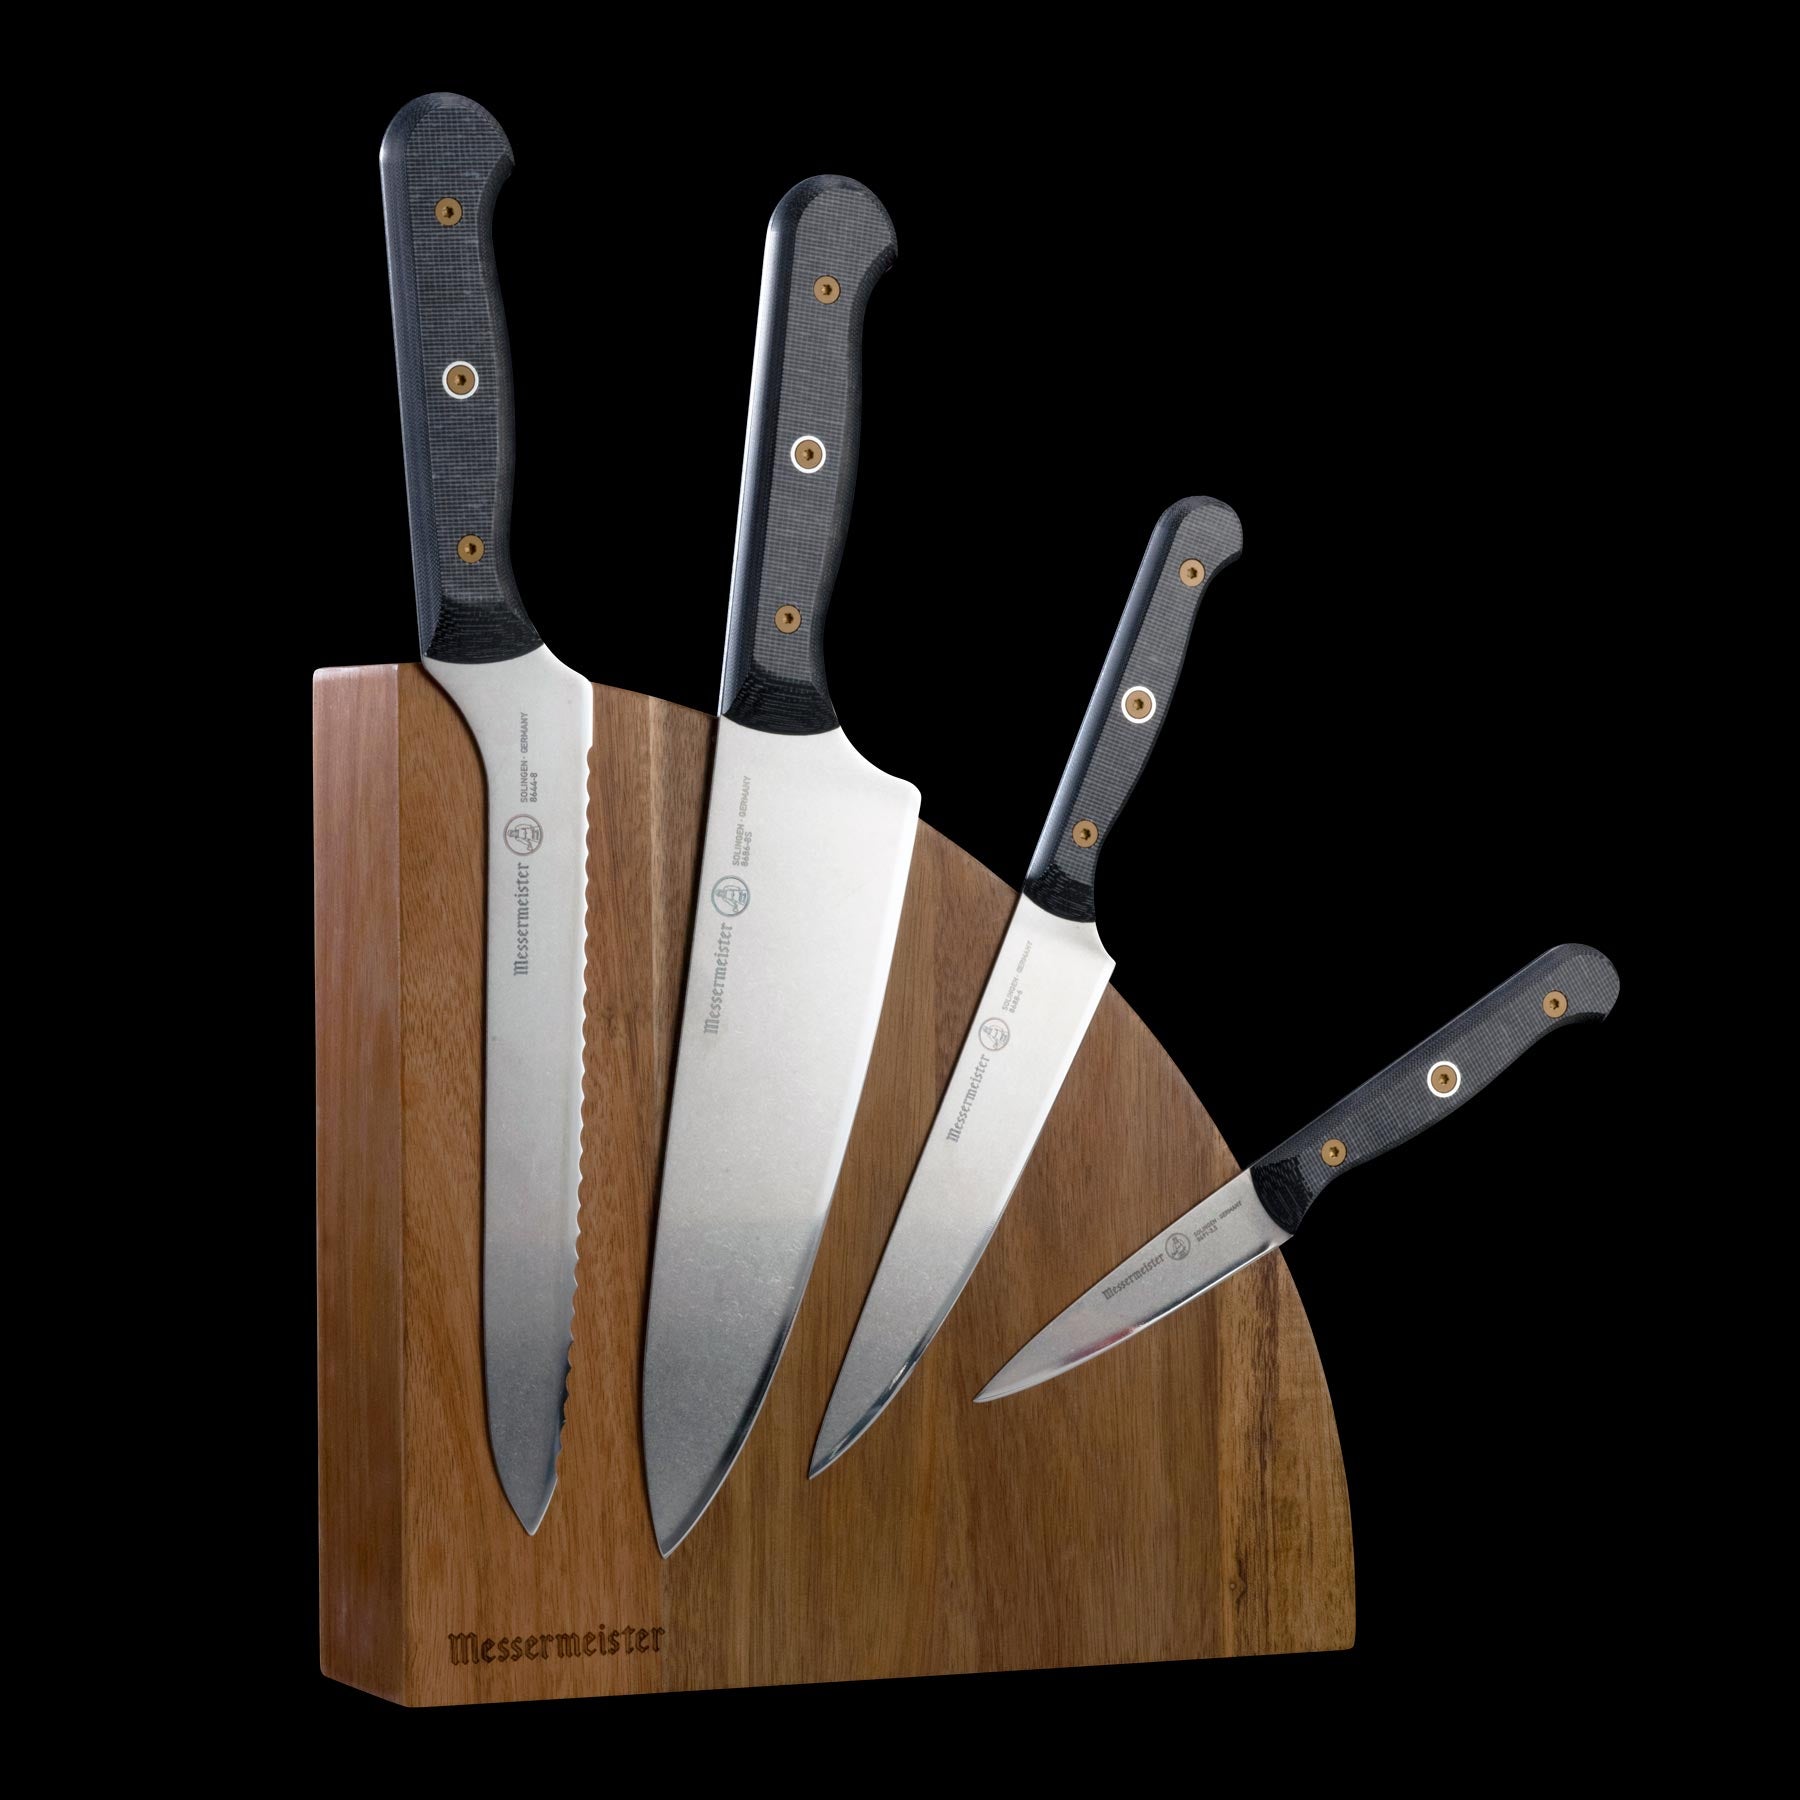 Great kitchen deal: A five-piece set of Damascus kitchen knives for under  $100